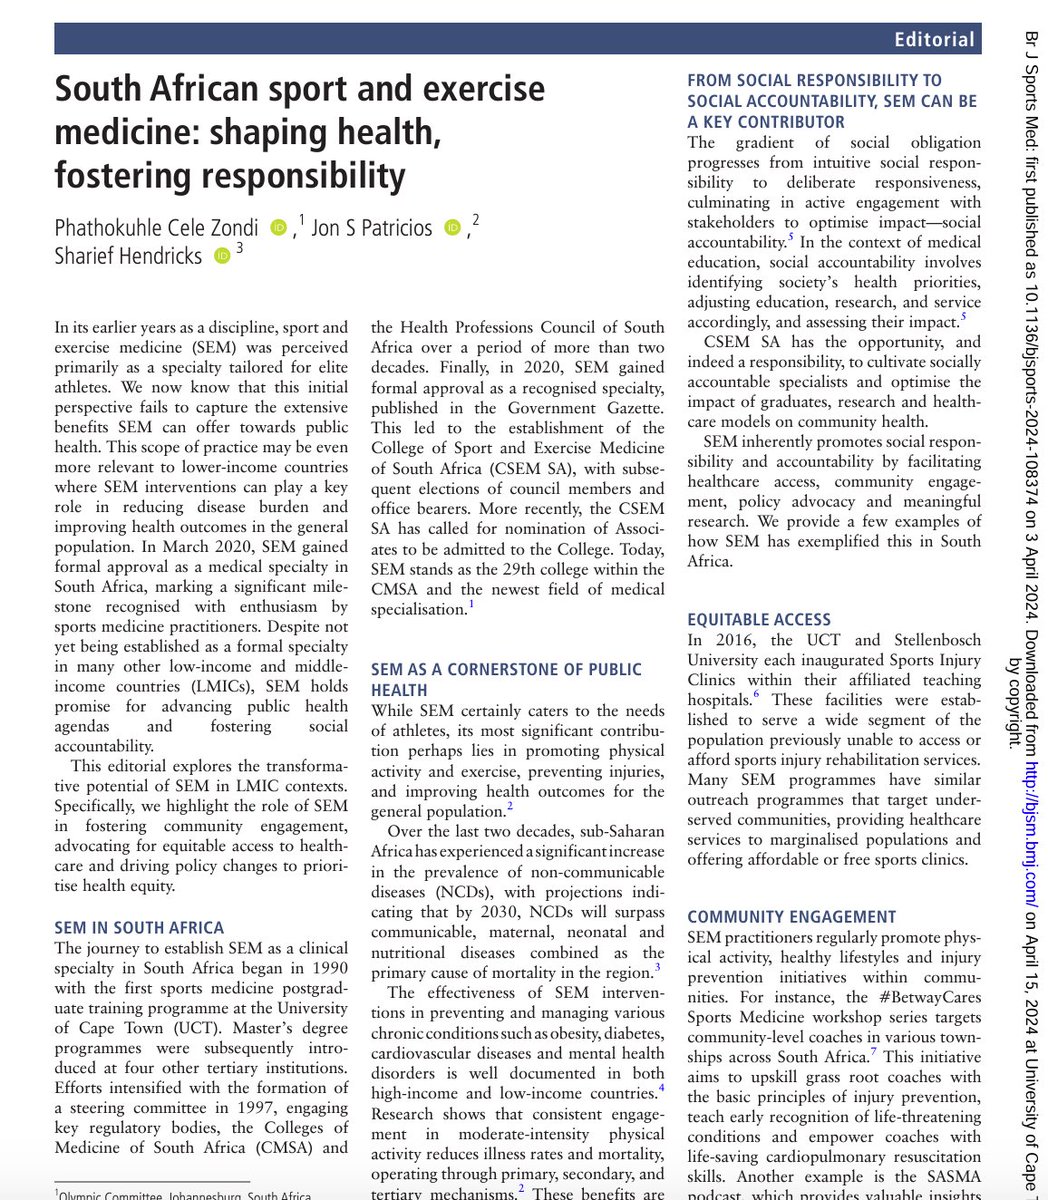 New Editorial: South African sport & exercise medicine: shaping health, fostering responsibility in @BJSM_BMJ @SASMA_ZA @jonpatricios @phatho_z bjsm.bmj.com/content/early/… 🇿🇦 💪🏾